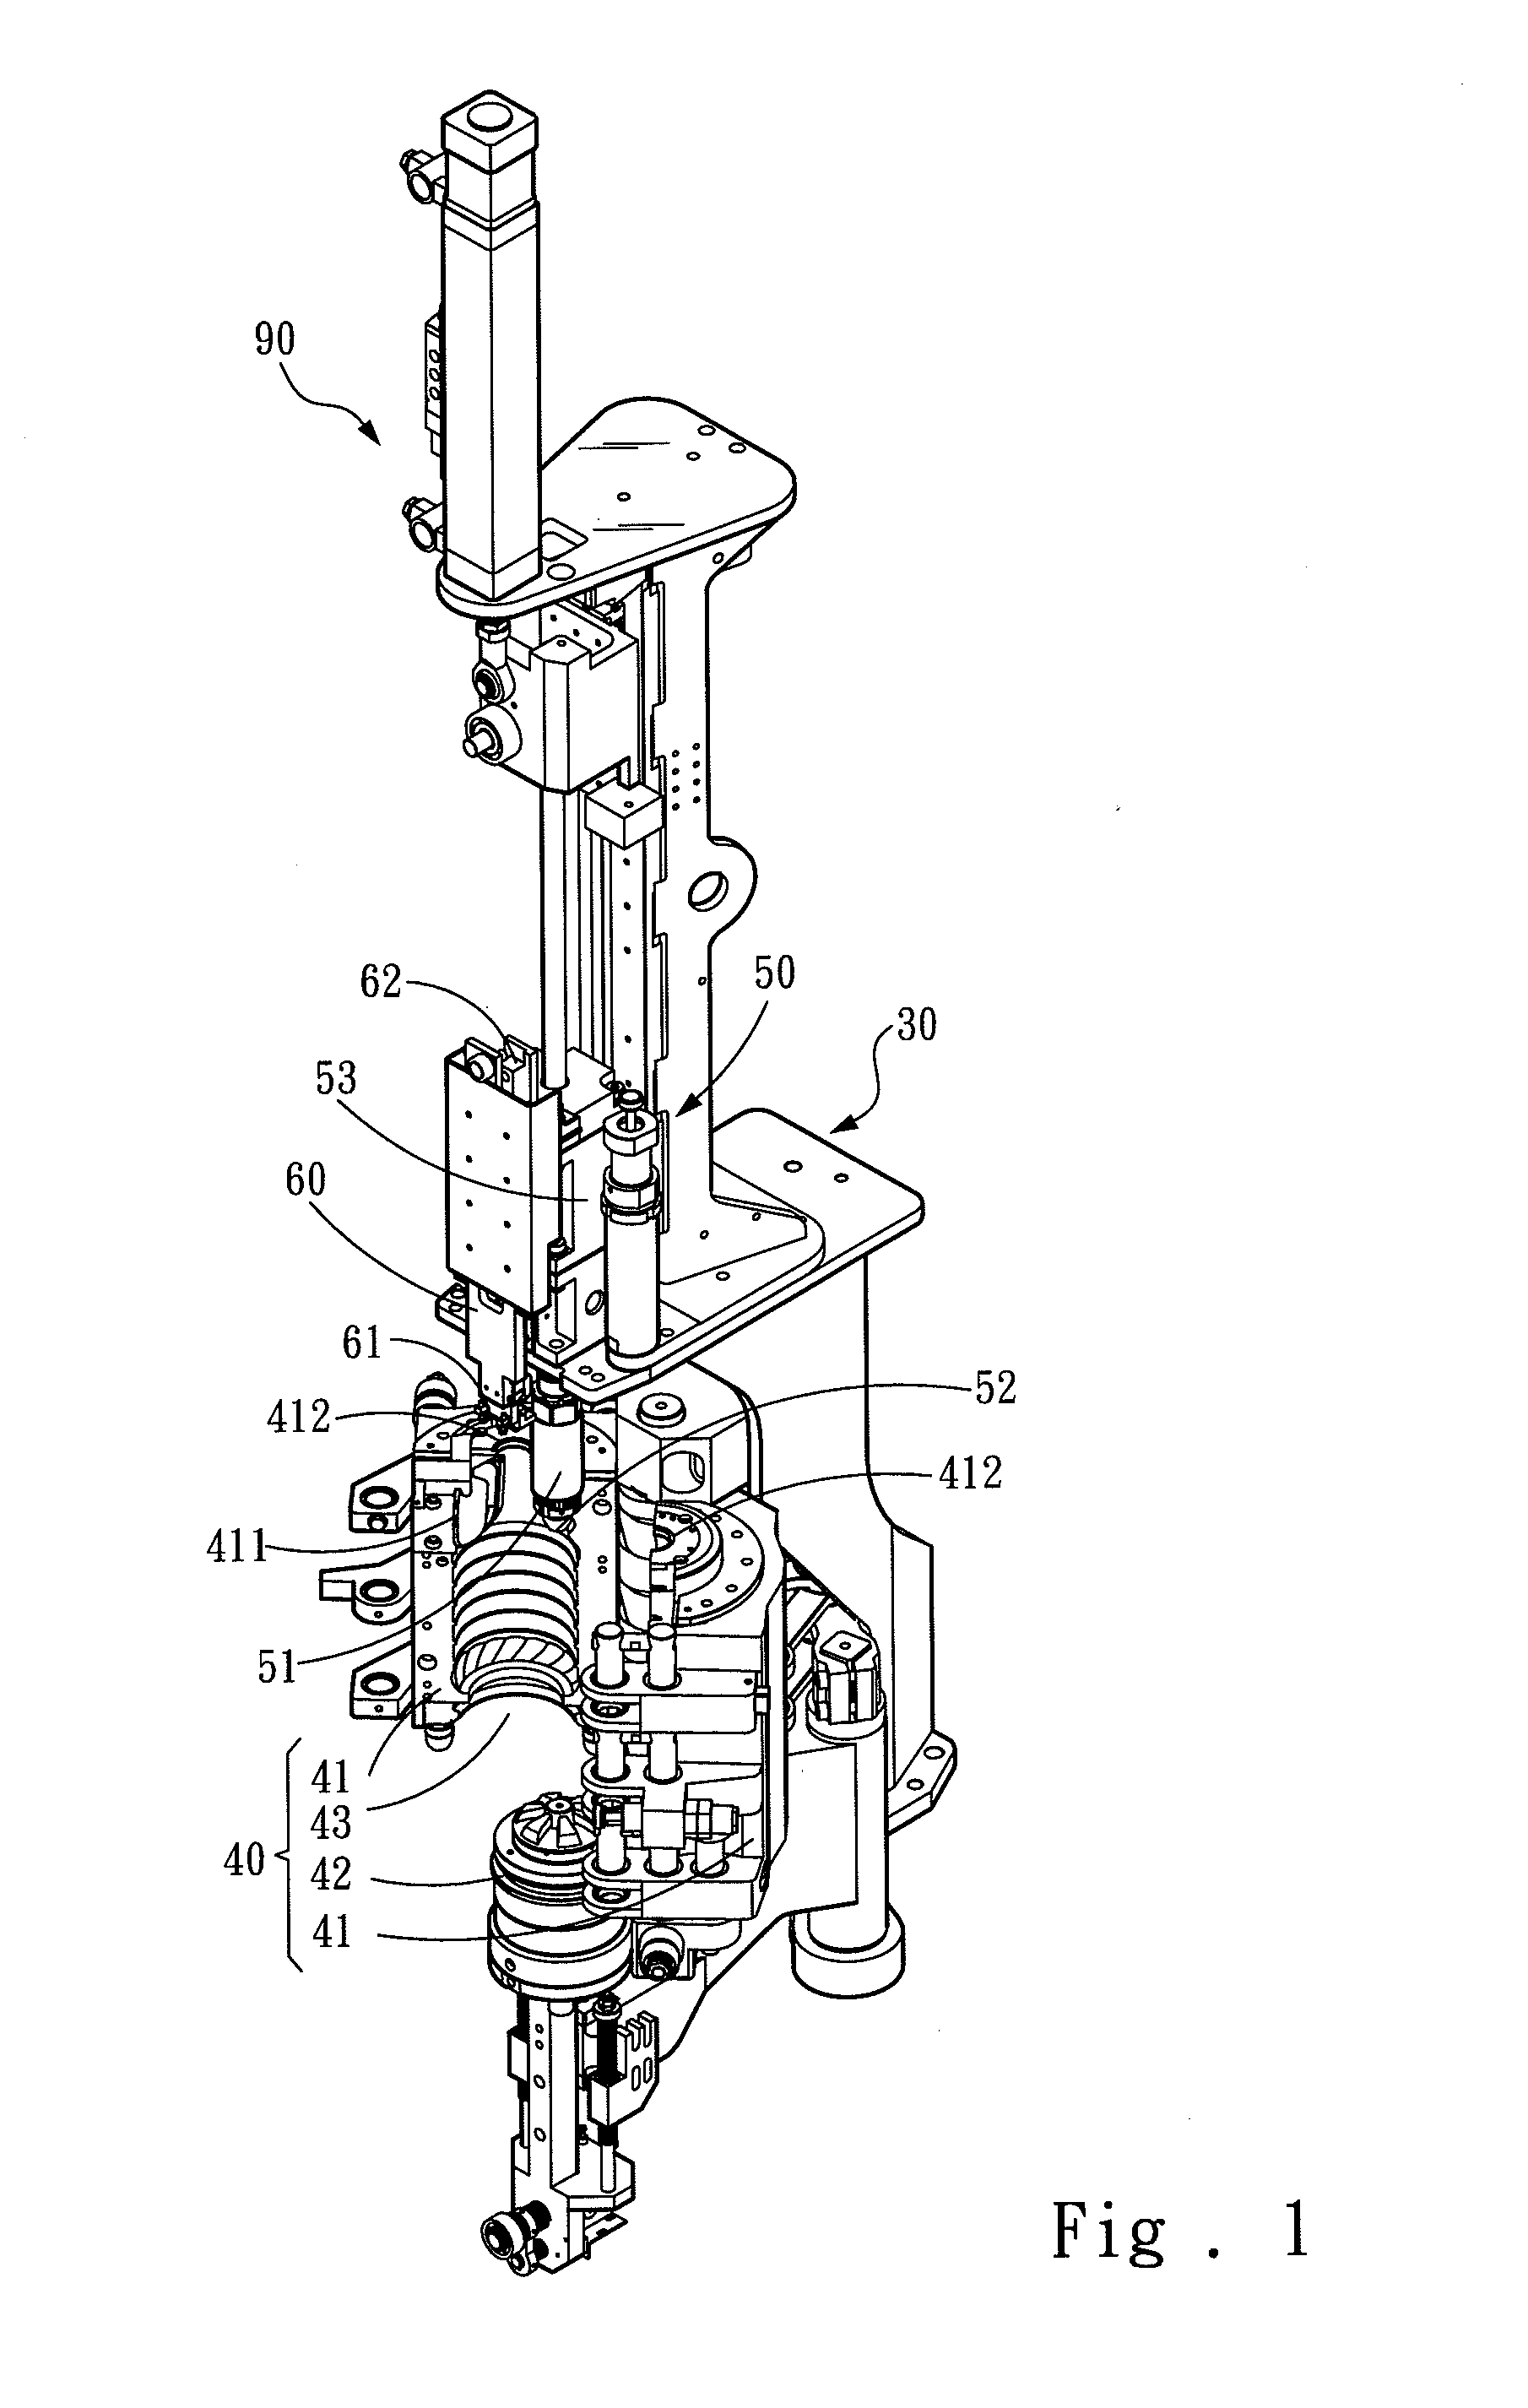 Method of planting a handle and a bottle parison to a mold of blow-molding modules for manufacturing plastic containers